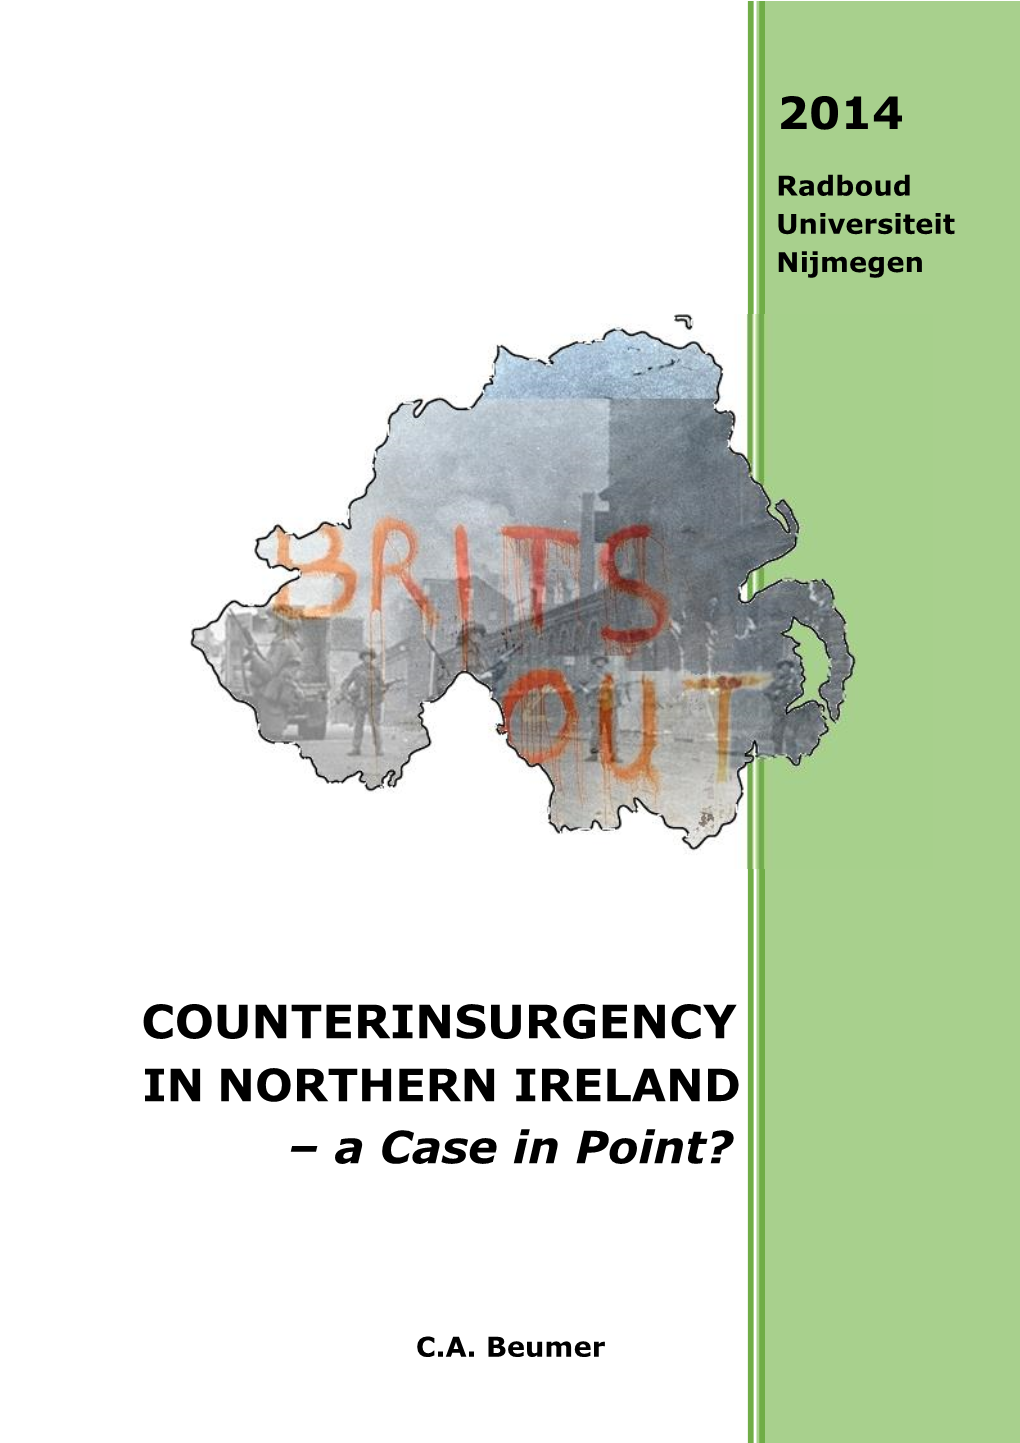 COUNTERINSURGENCY in NORTHERN IRELAND – a Case in Point?